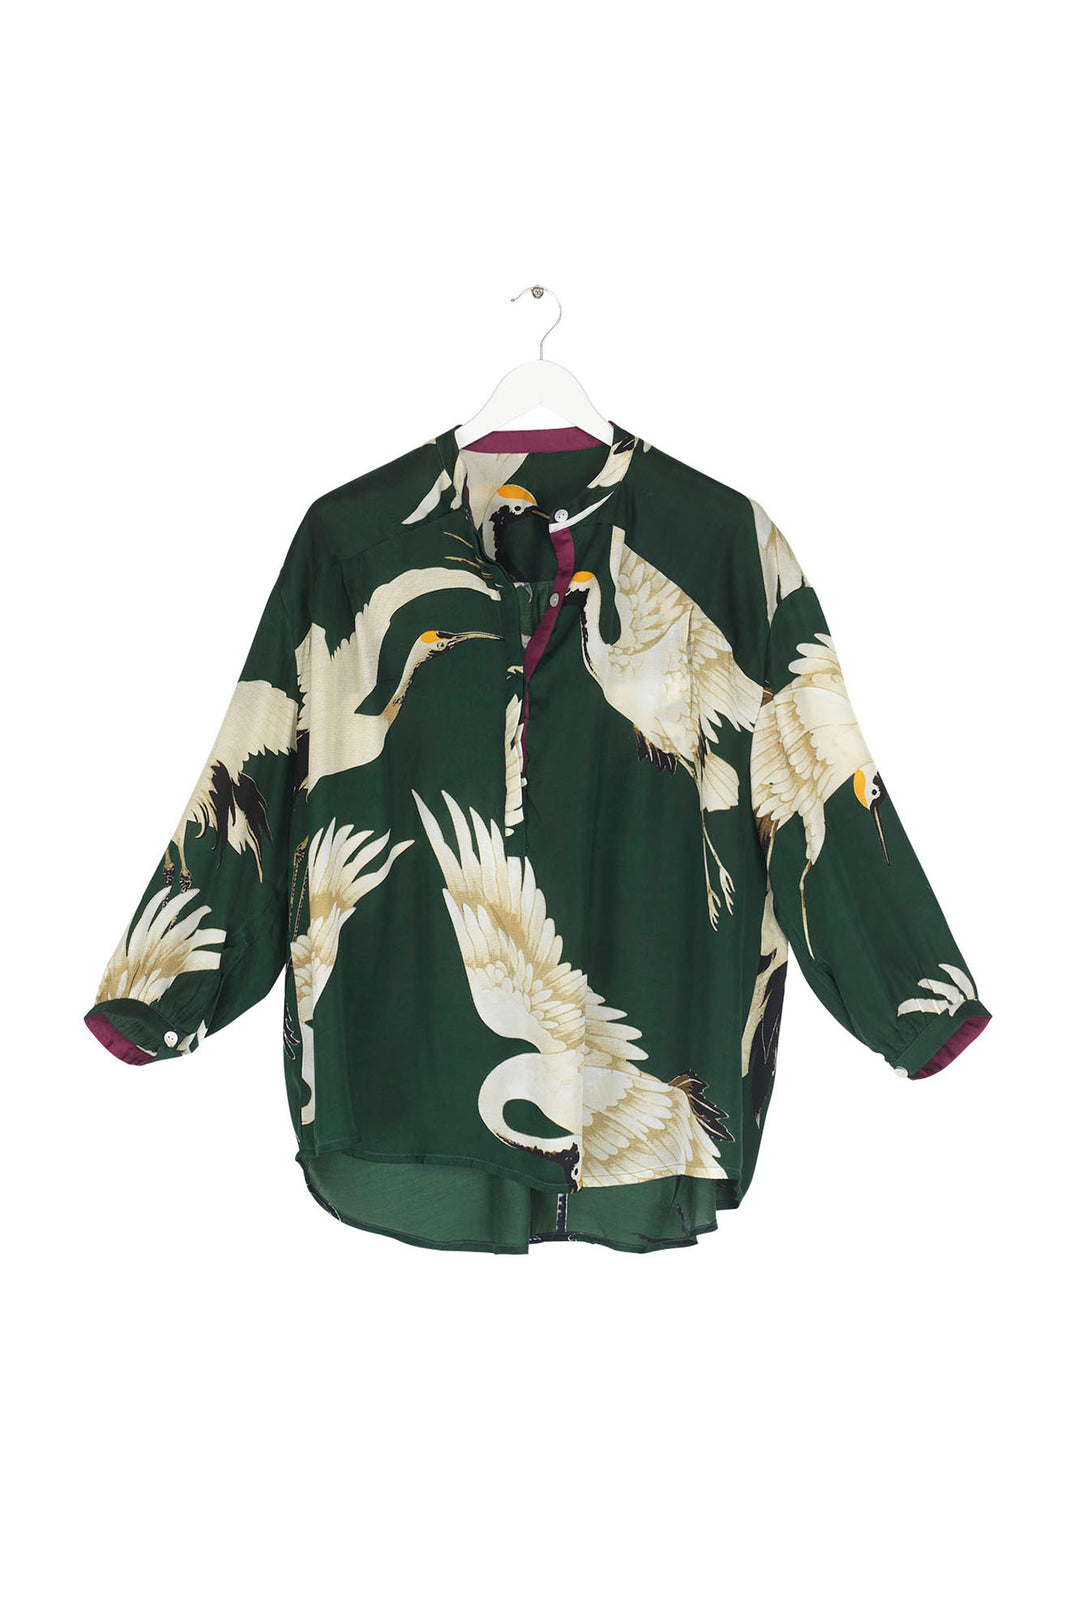 ladies button up satin shirt green background with stork bird print by One Hundred Stars